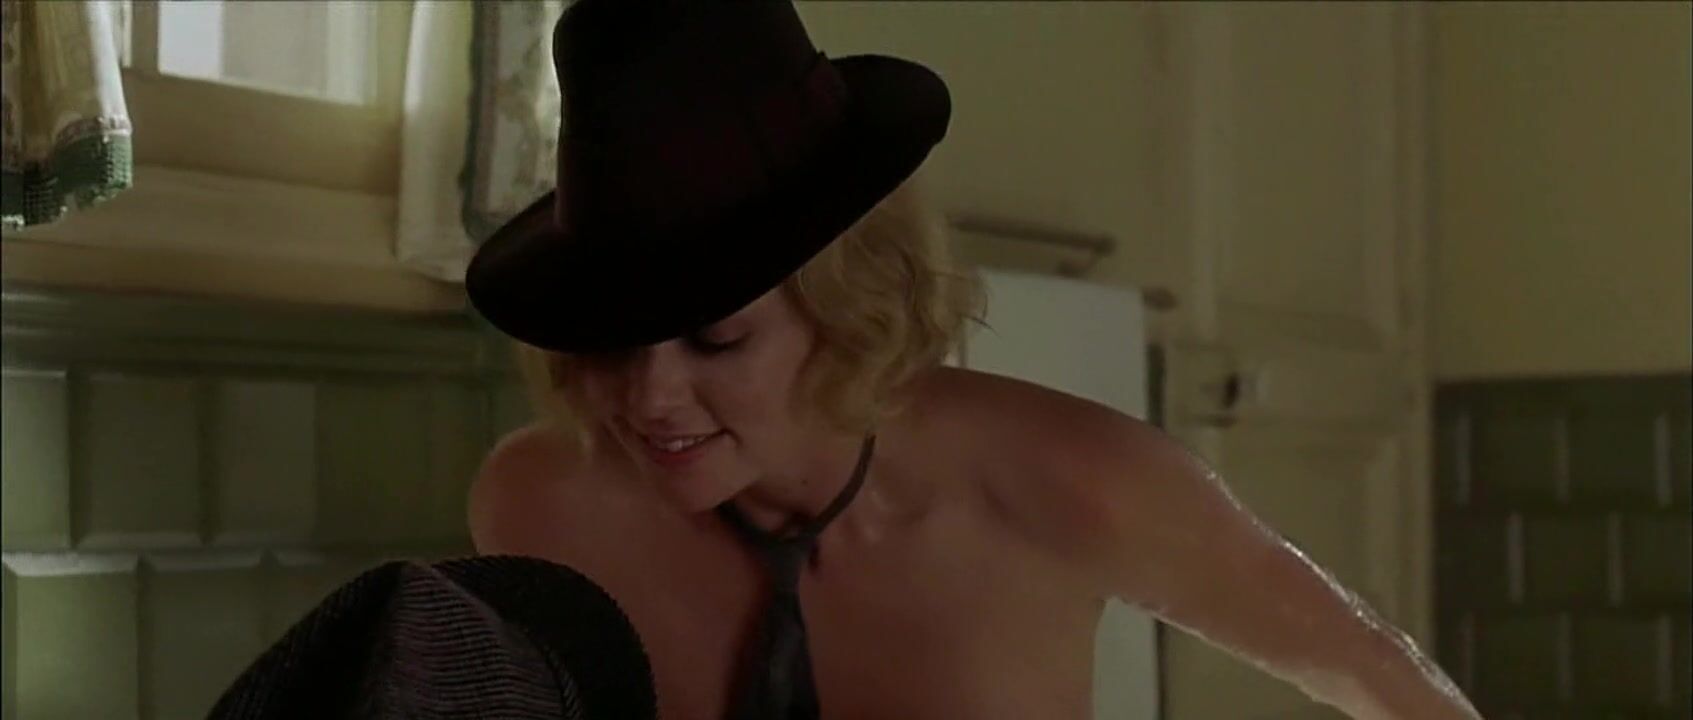 Hot Mom Young man hooks up with shameful blonde actress Charlize Theron in Head in the Clouds Pervs - 1